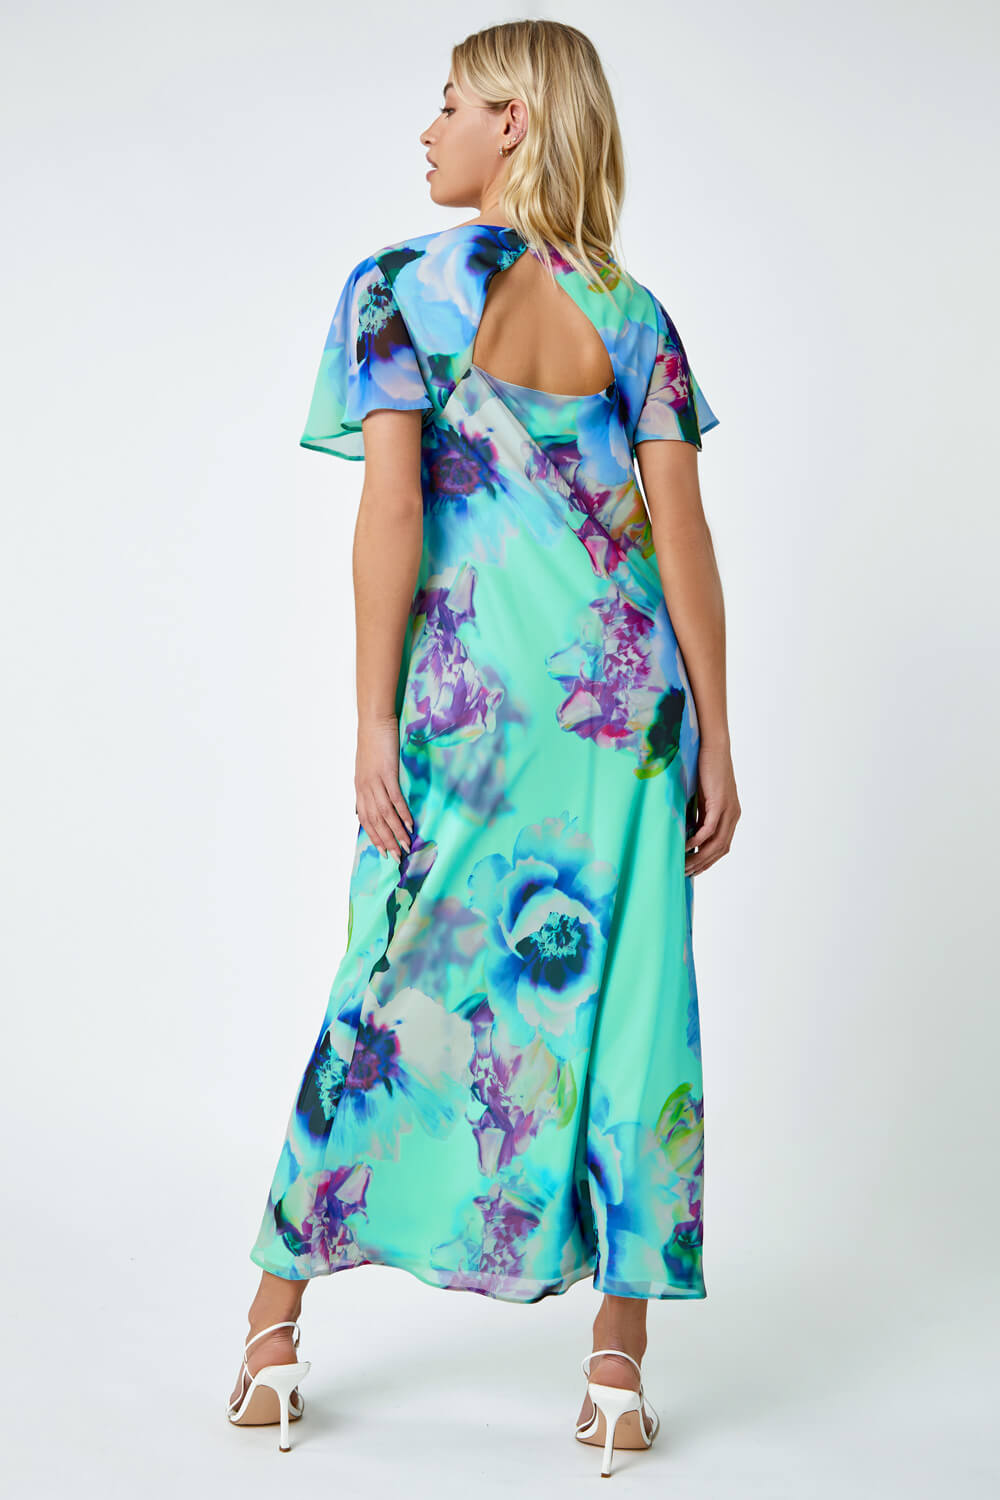 Turquoise Floral Print Cowl Neck Dress, Image 3 of 5